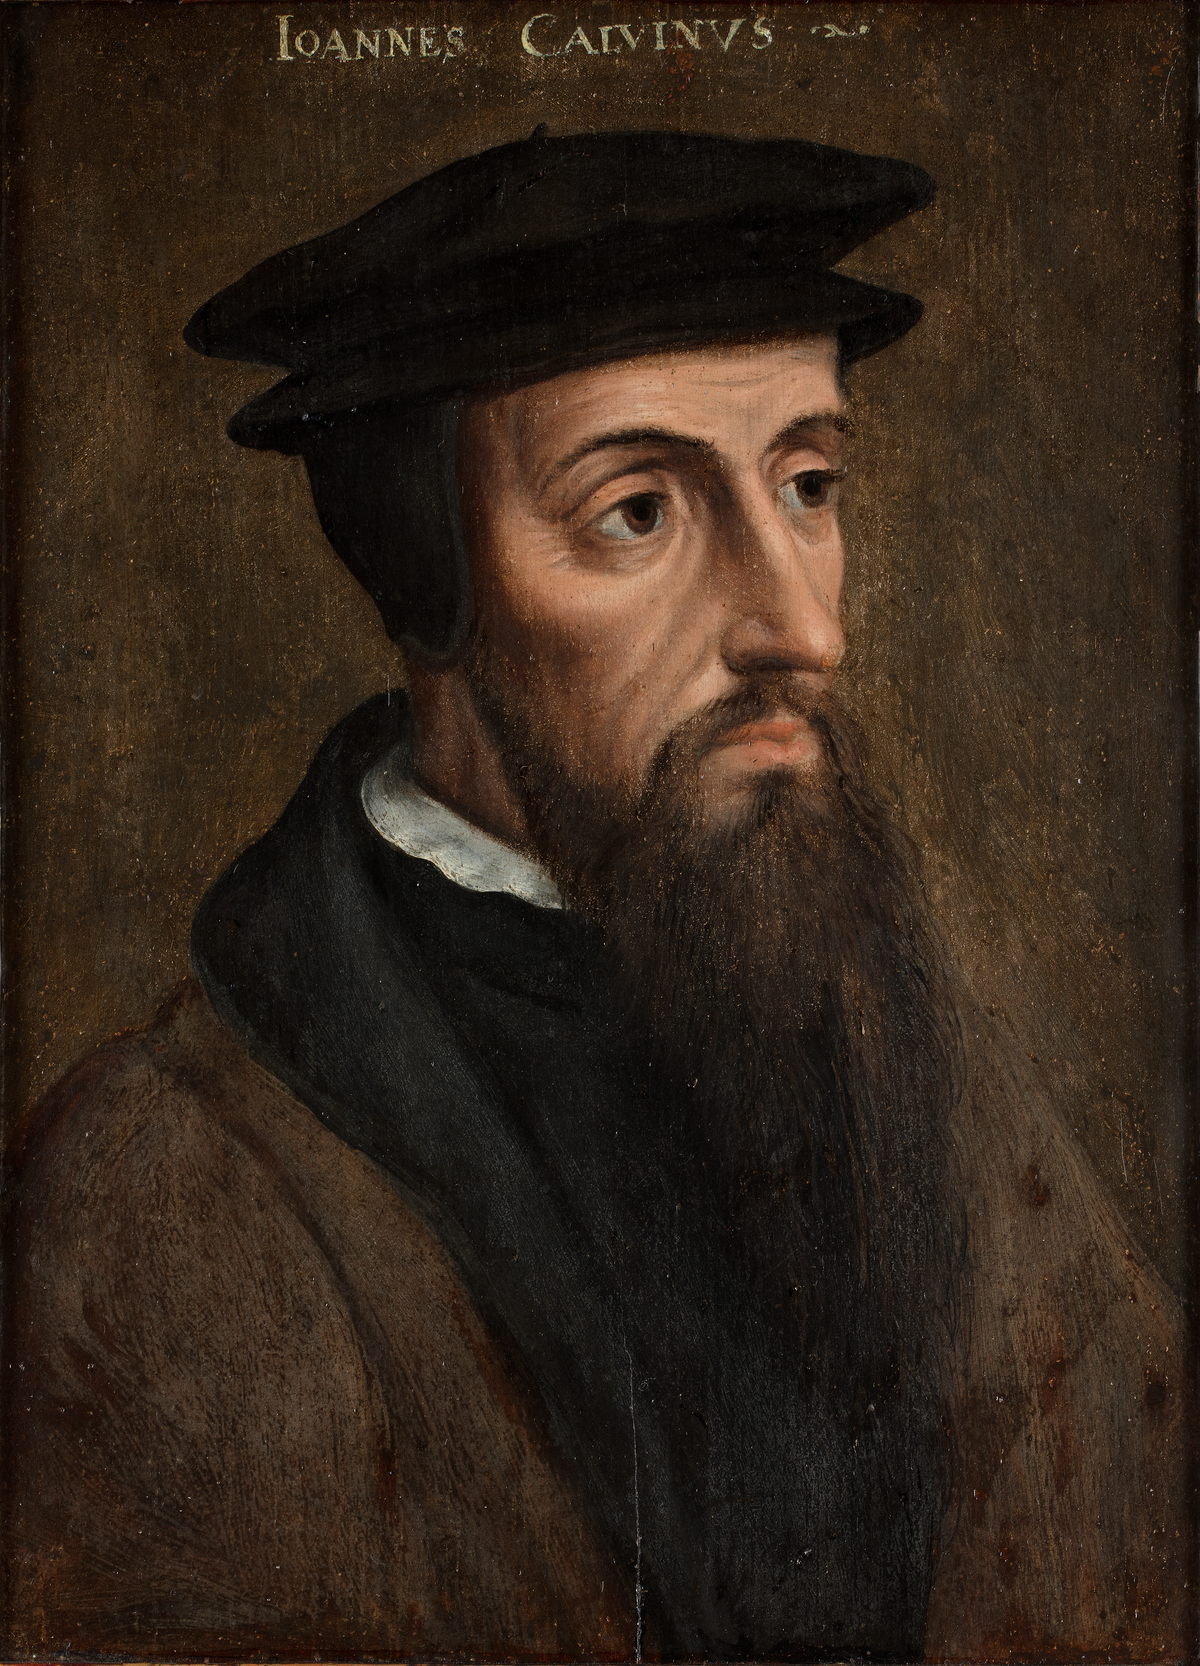 John Calvin (1509-1564) was a French theologian and pastor who became one of the most influential figures in the development of Protestant Christianity. He was a key figure in the Protestant Reformation and is most well-known for his doctrine of predestination and his emphasis on the sovereignty of God. #JohnCalvin